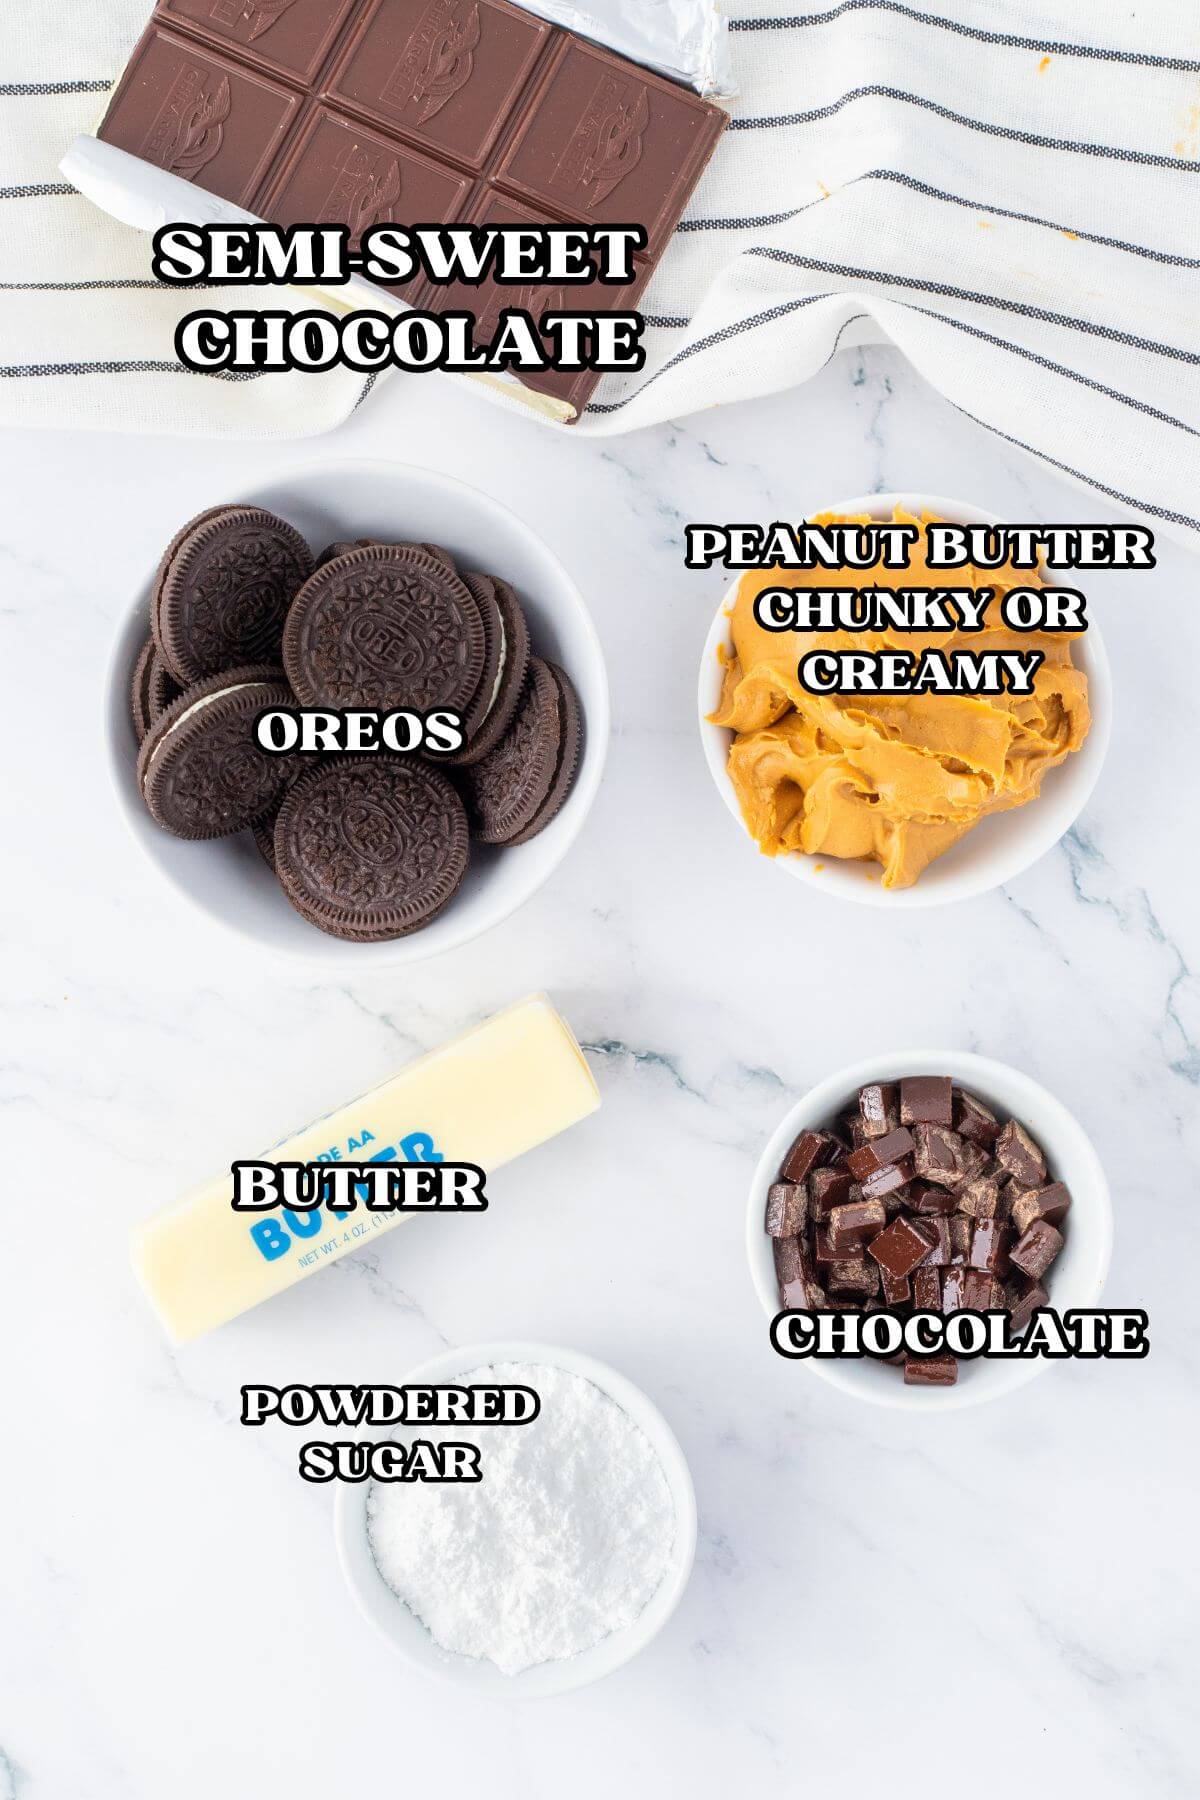 Labeled ingredients for peanut butter pie with Oreo crust.